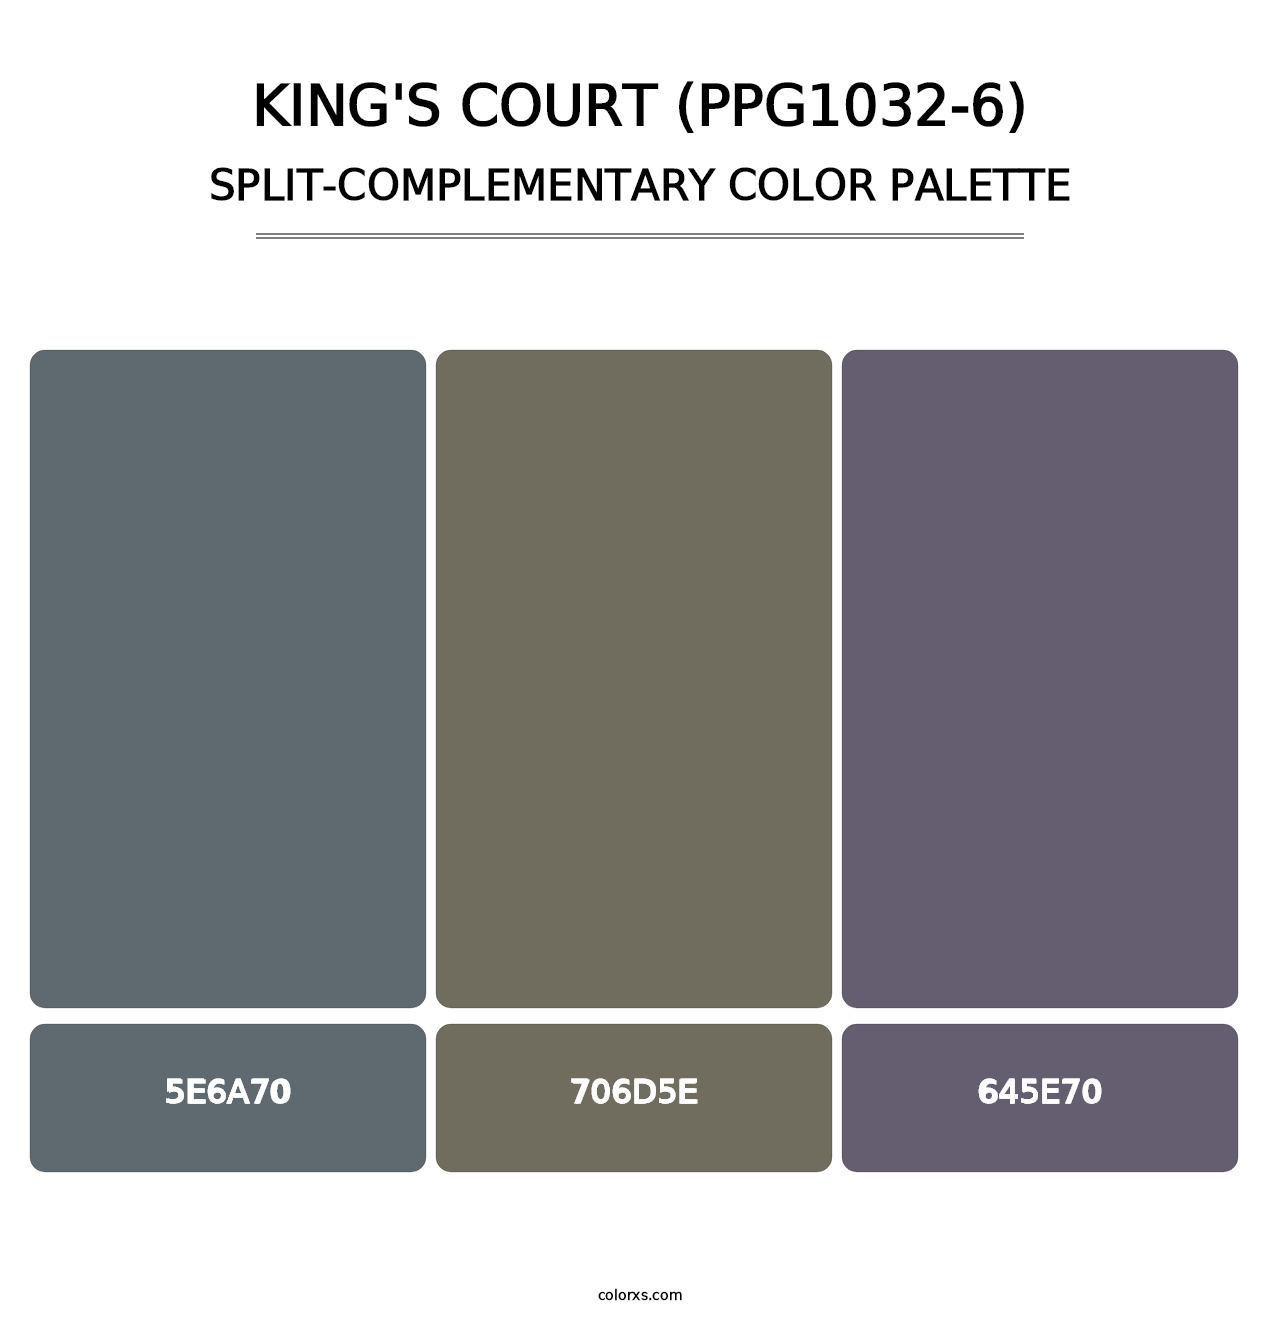 King's Court (PPG1032-6) - Split-Complementary Color Palette